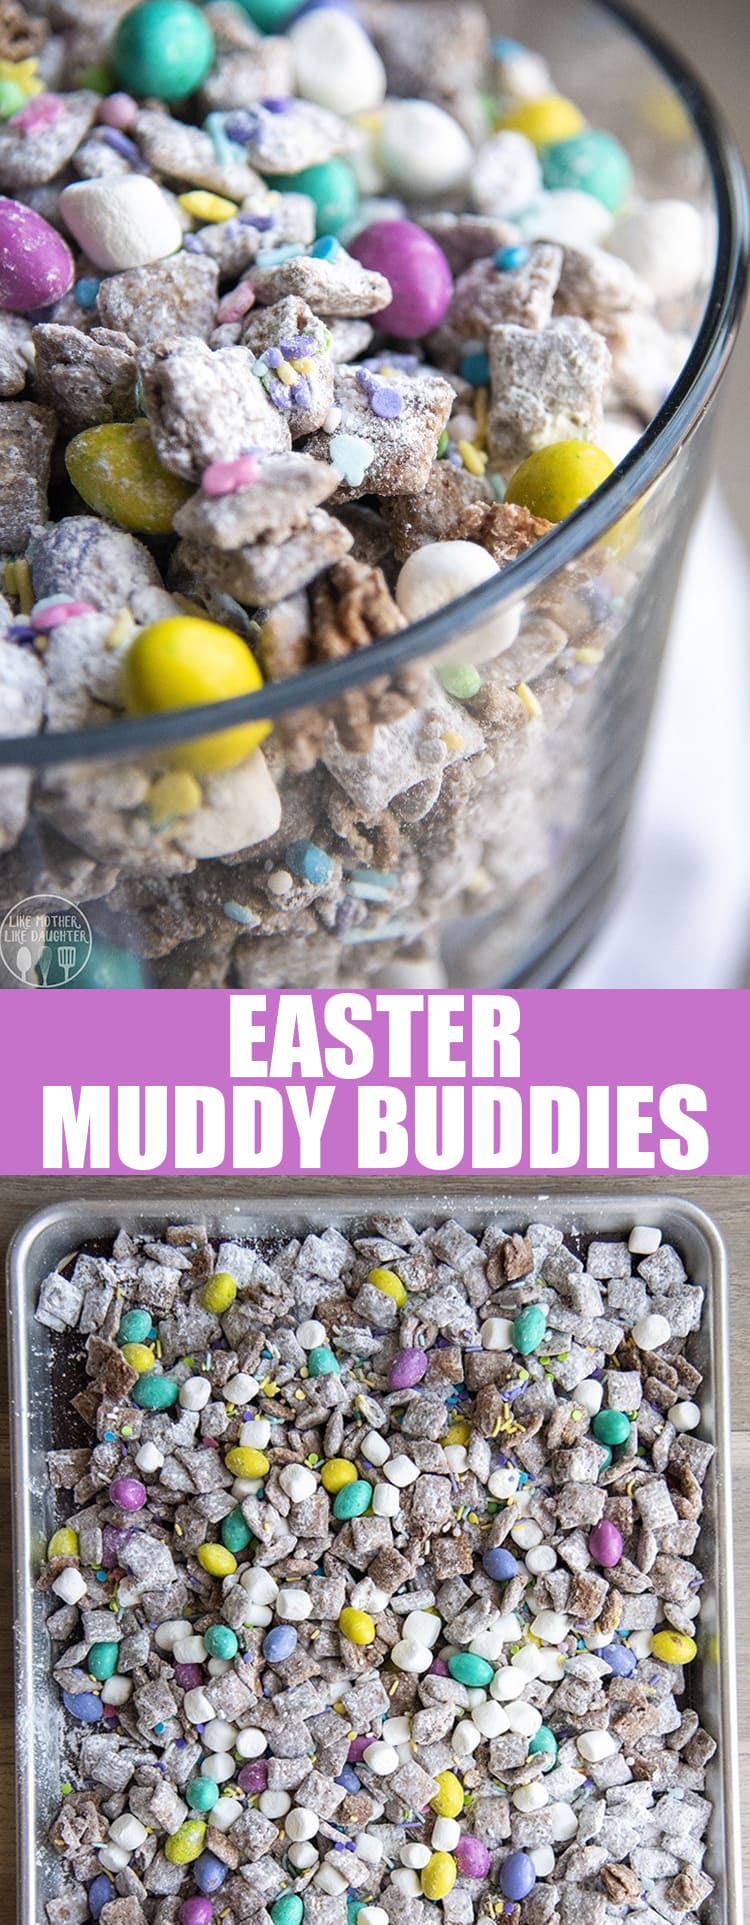 A collage of two photos of Easter muddy buddies with a purple text block between them.